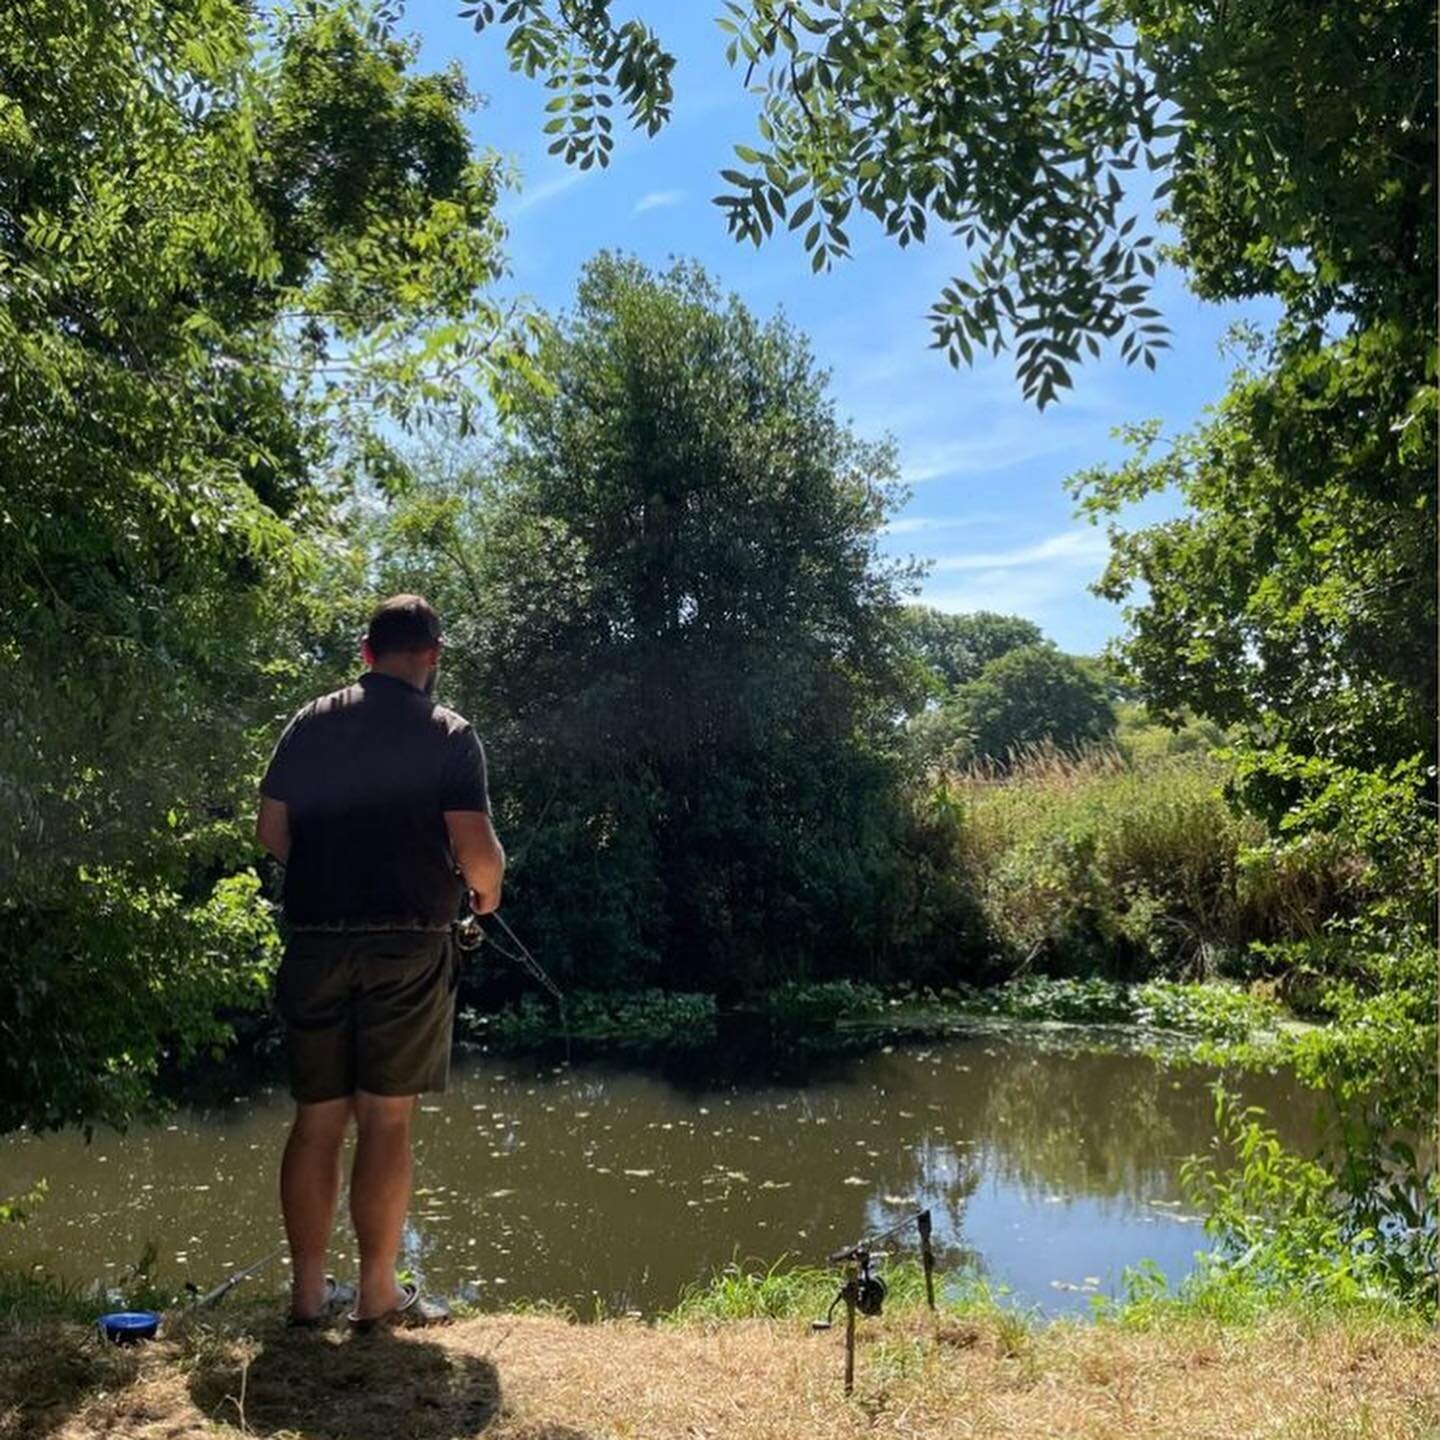 July you&rsquo;ve been fantastic, here is some snippets from our lovely customers/ friends! August we&rsquo;re so very excited about you&hellip; #camping #ukcamping #campingholiday #staycation #river #riverfishing #ukvanlife #vanlife #caravan #camp #